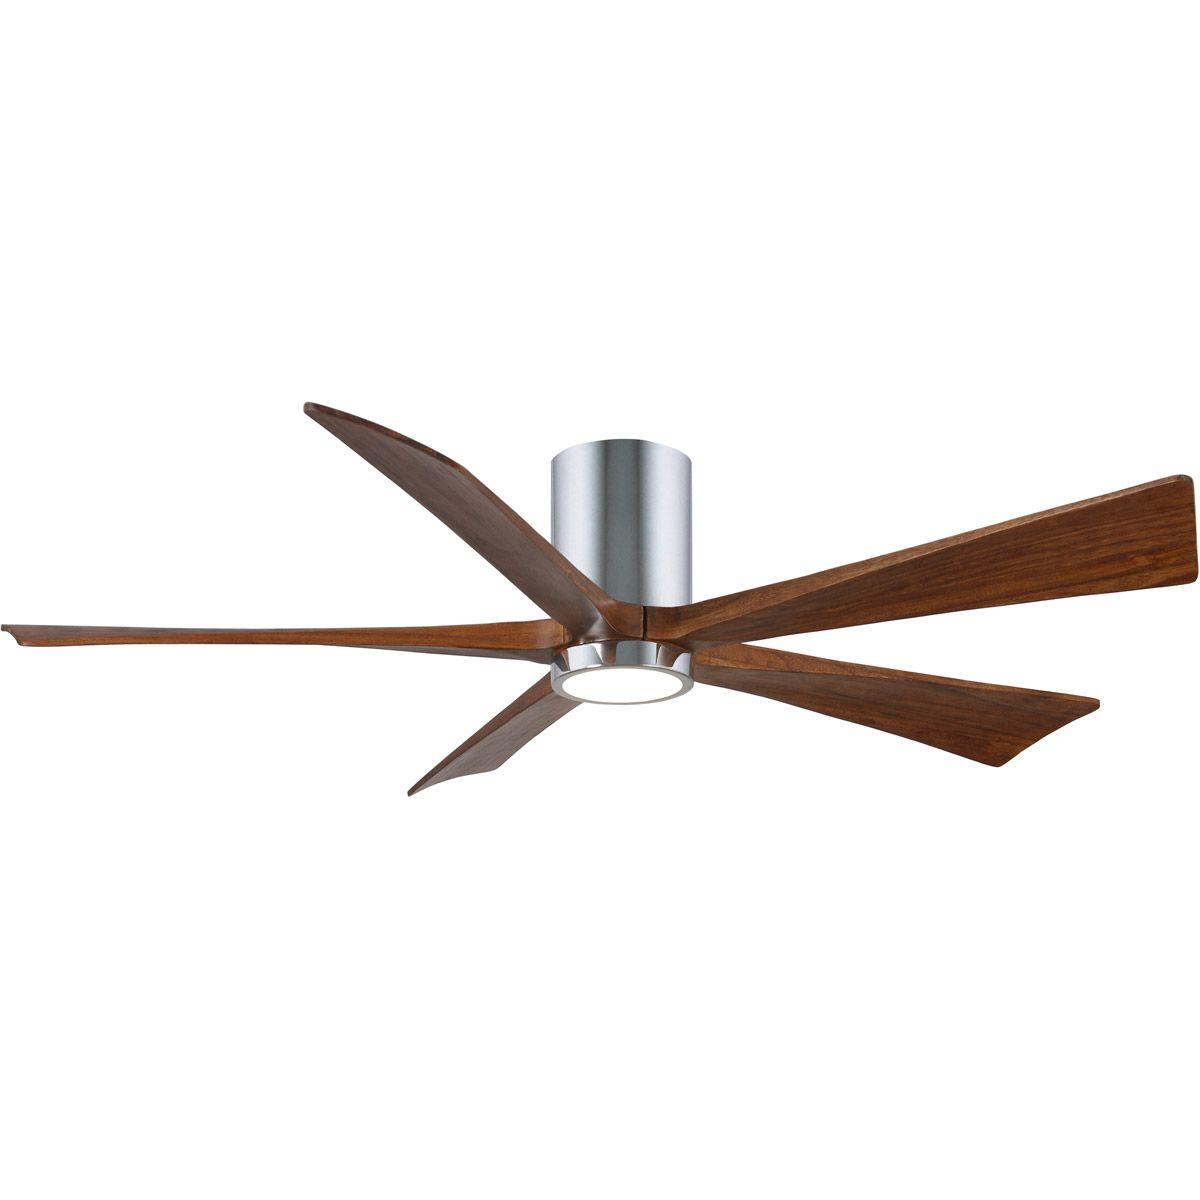 Irene 60 Inch Modern Outdoor Ceiling Fan With Light, Wall And Remote Control Included - Bees Lighting